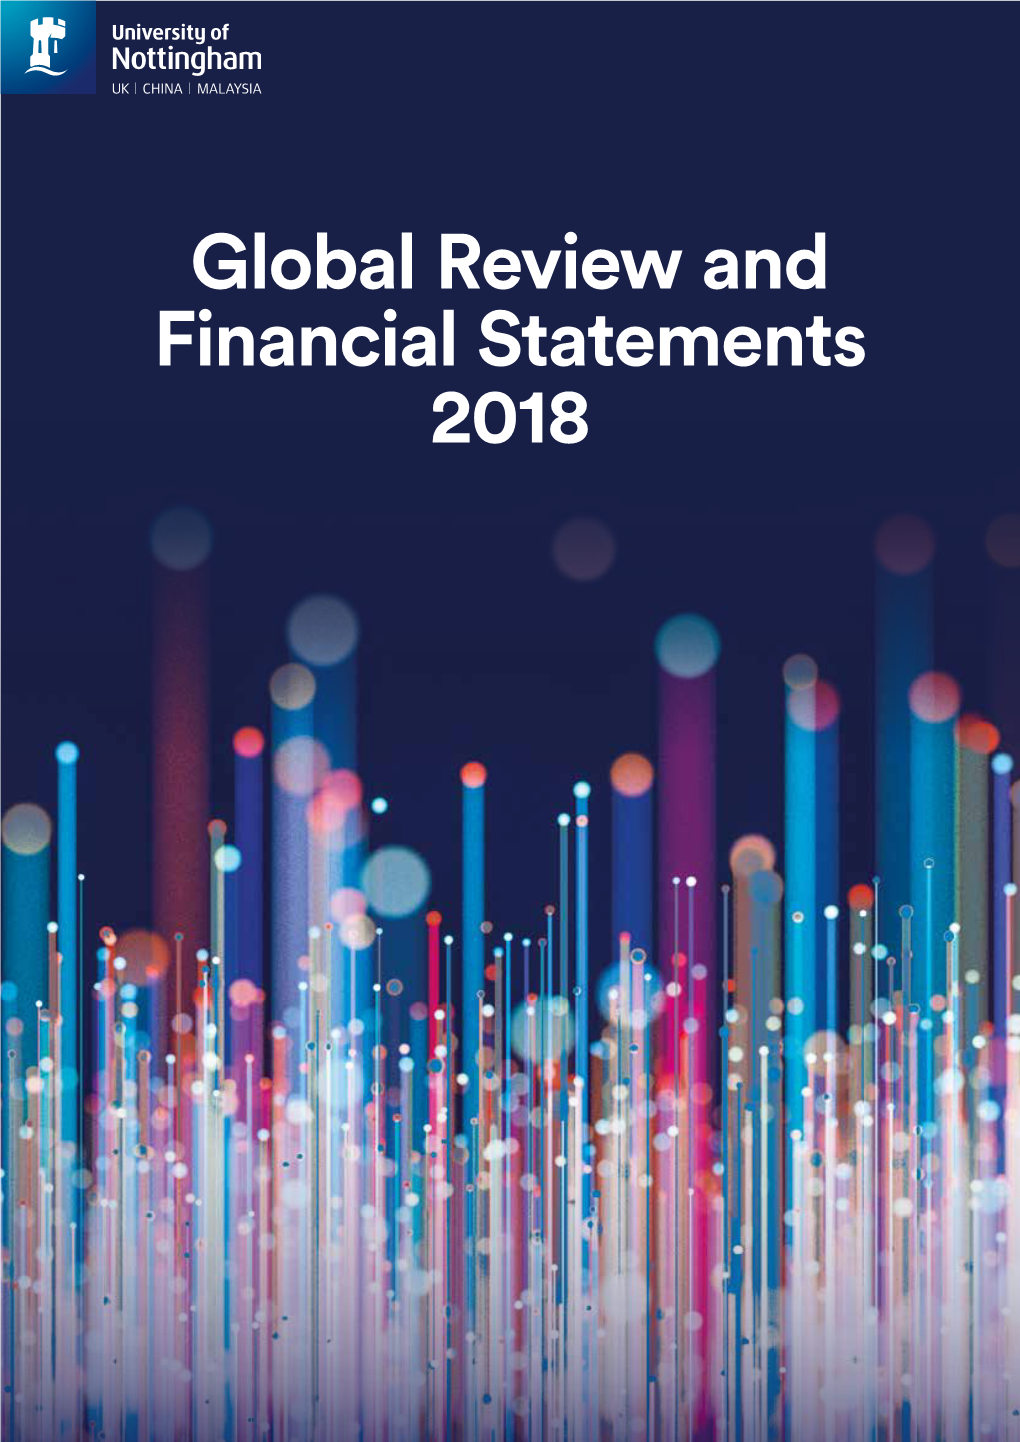 Global Review and Financial Statements 2018 Global Review and Financial Statements 2018 Council Membership 1 August 2017 to 31 July 2018 Contents